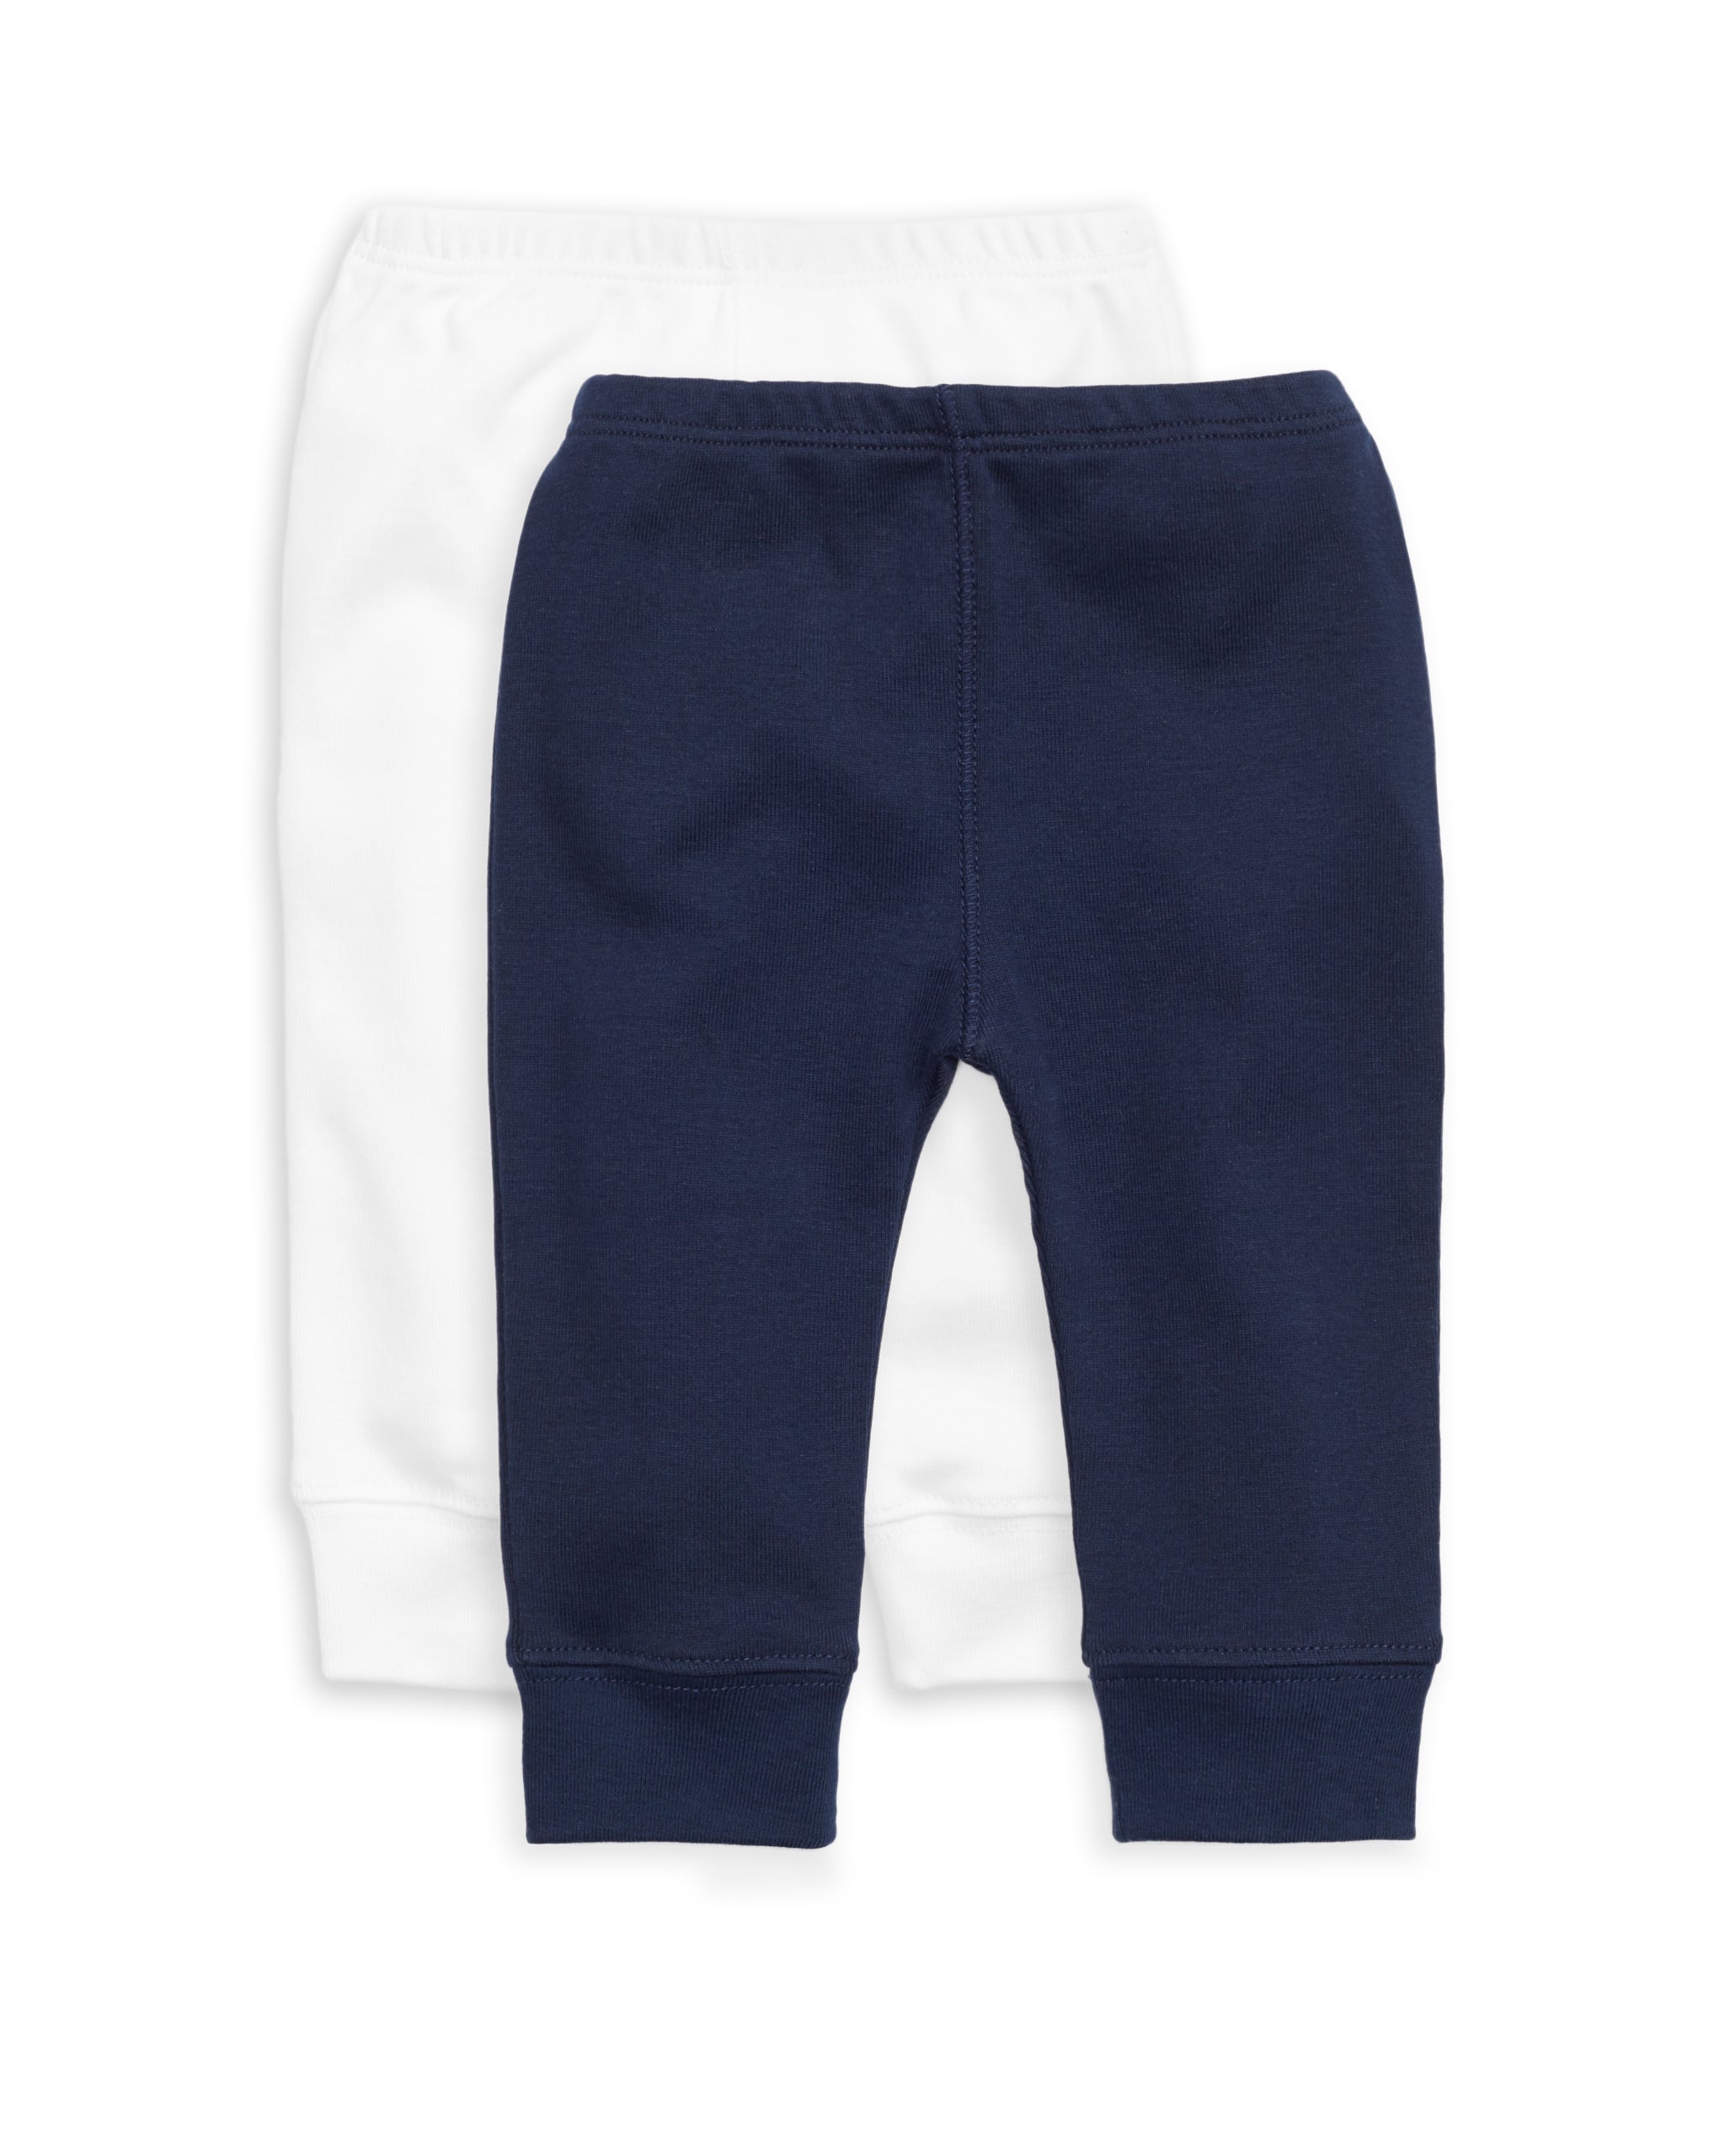 The Organic Baby Pant 2 Pack